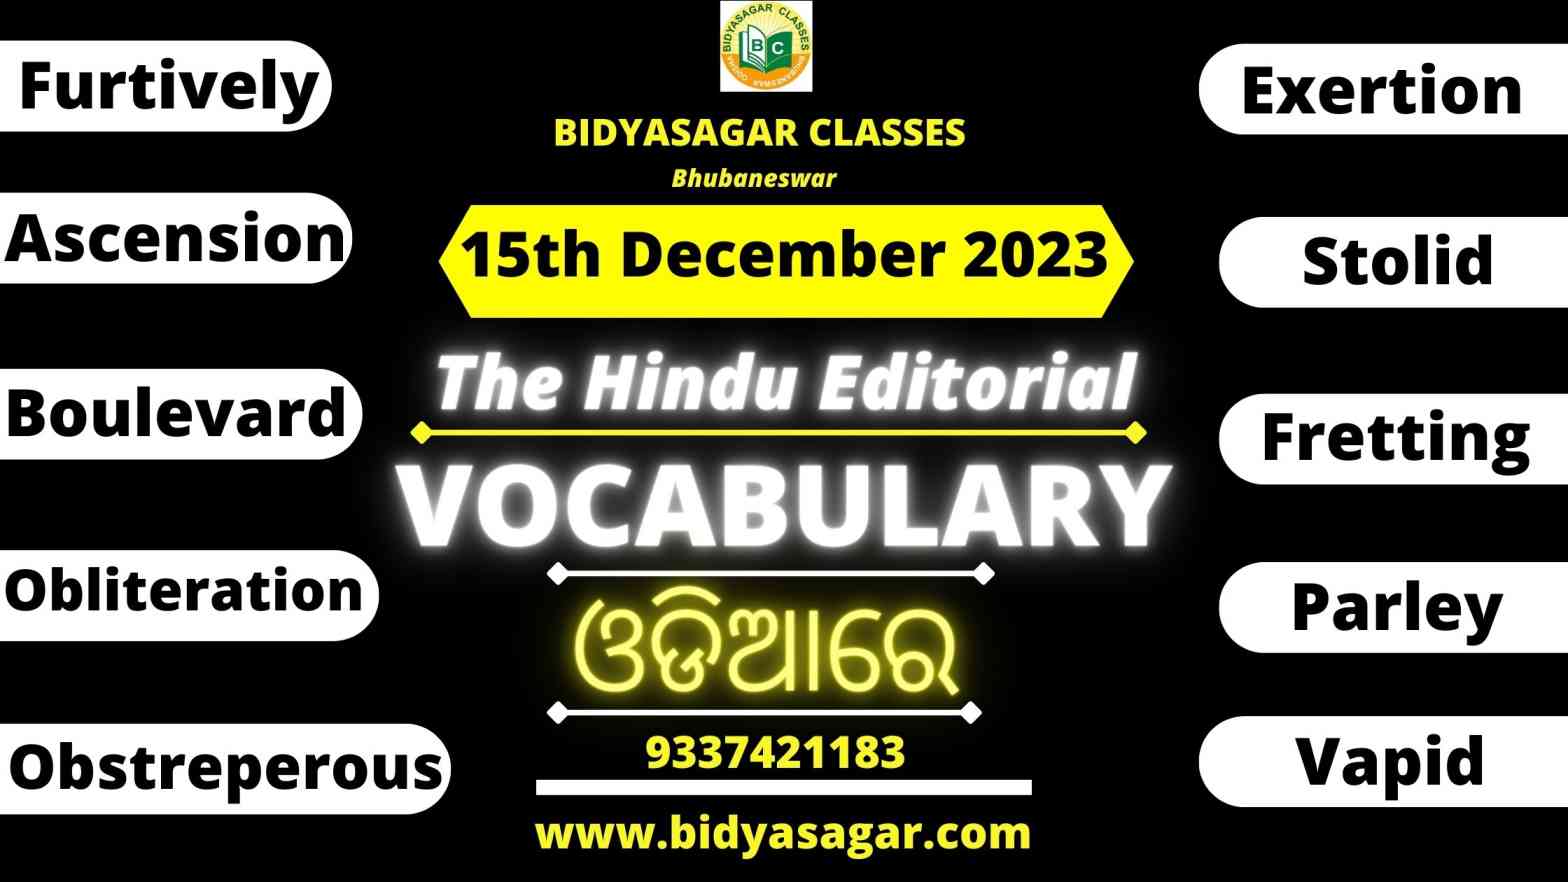 The Hindu Editorial Vocabulary of 15th December 2023